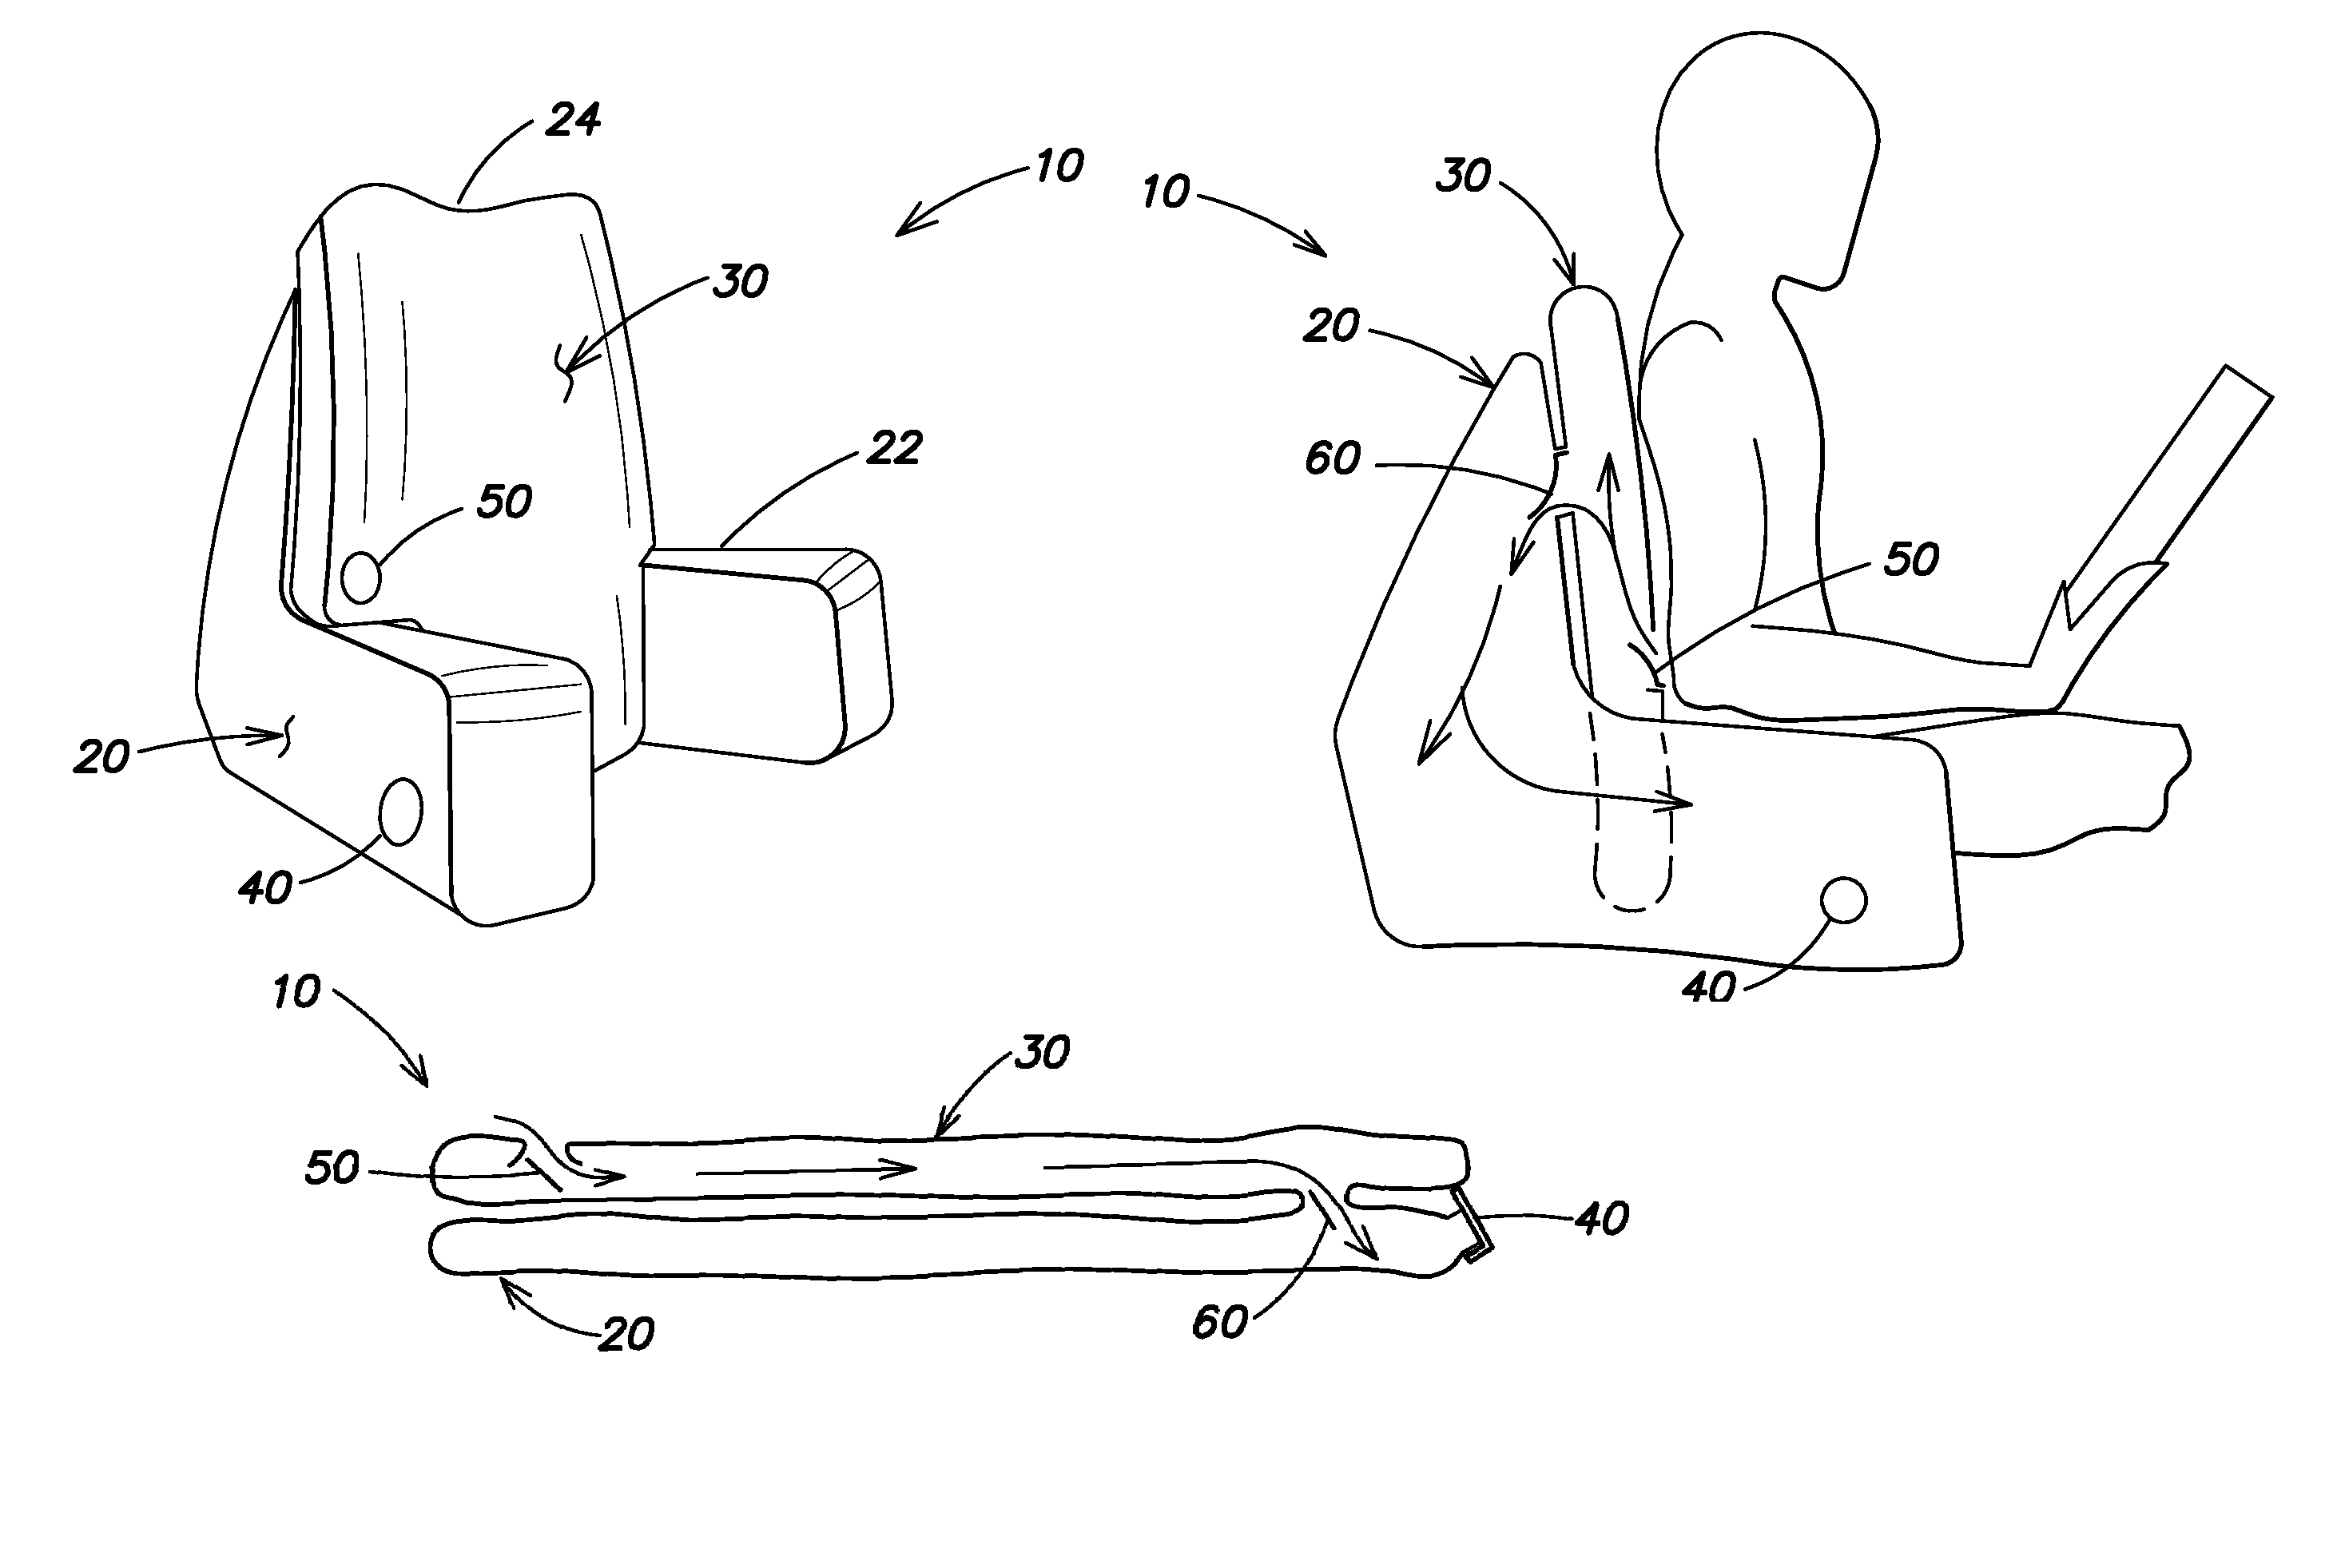 Fluidic chambers fluidly connected by one way valve and method for use